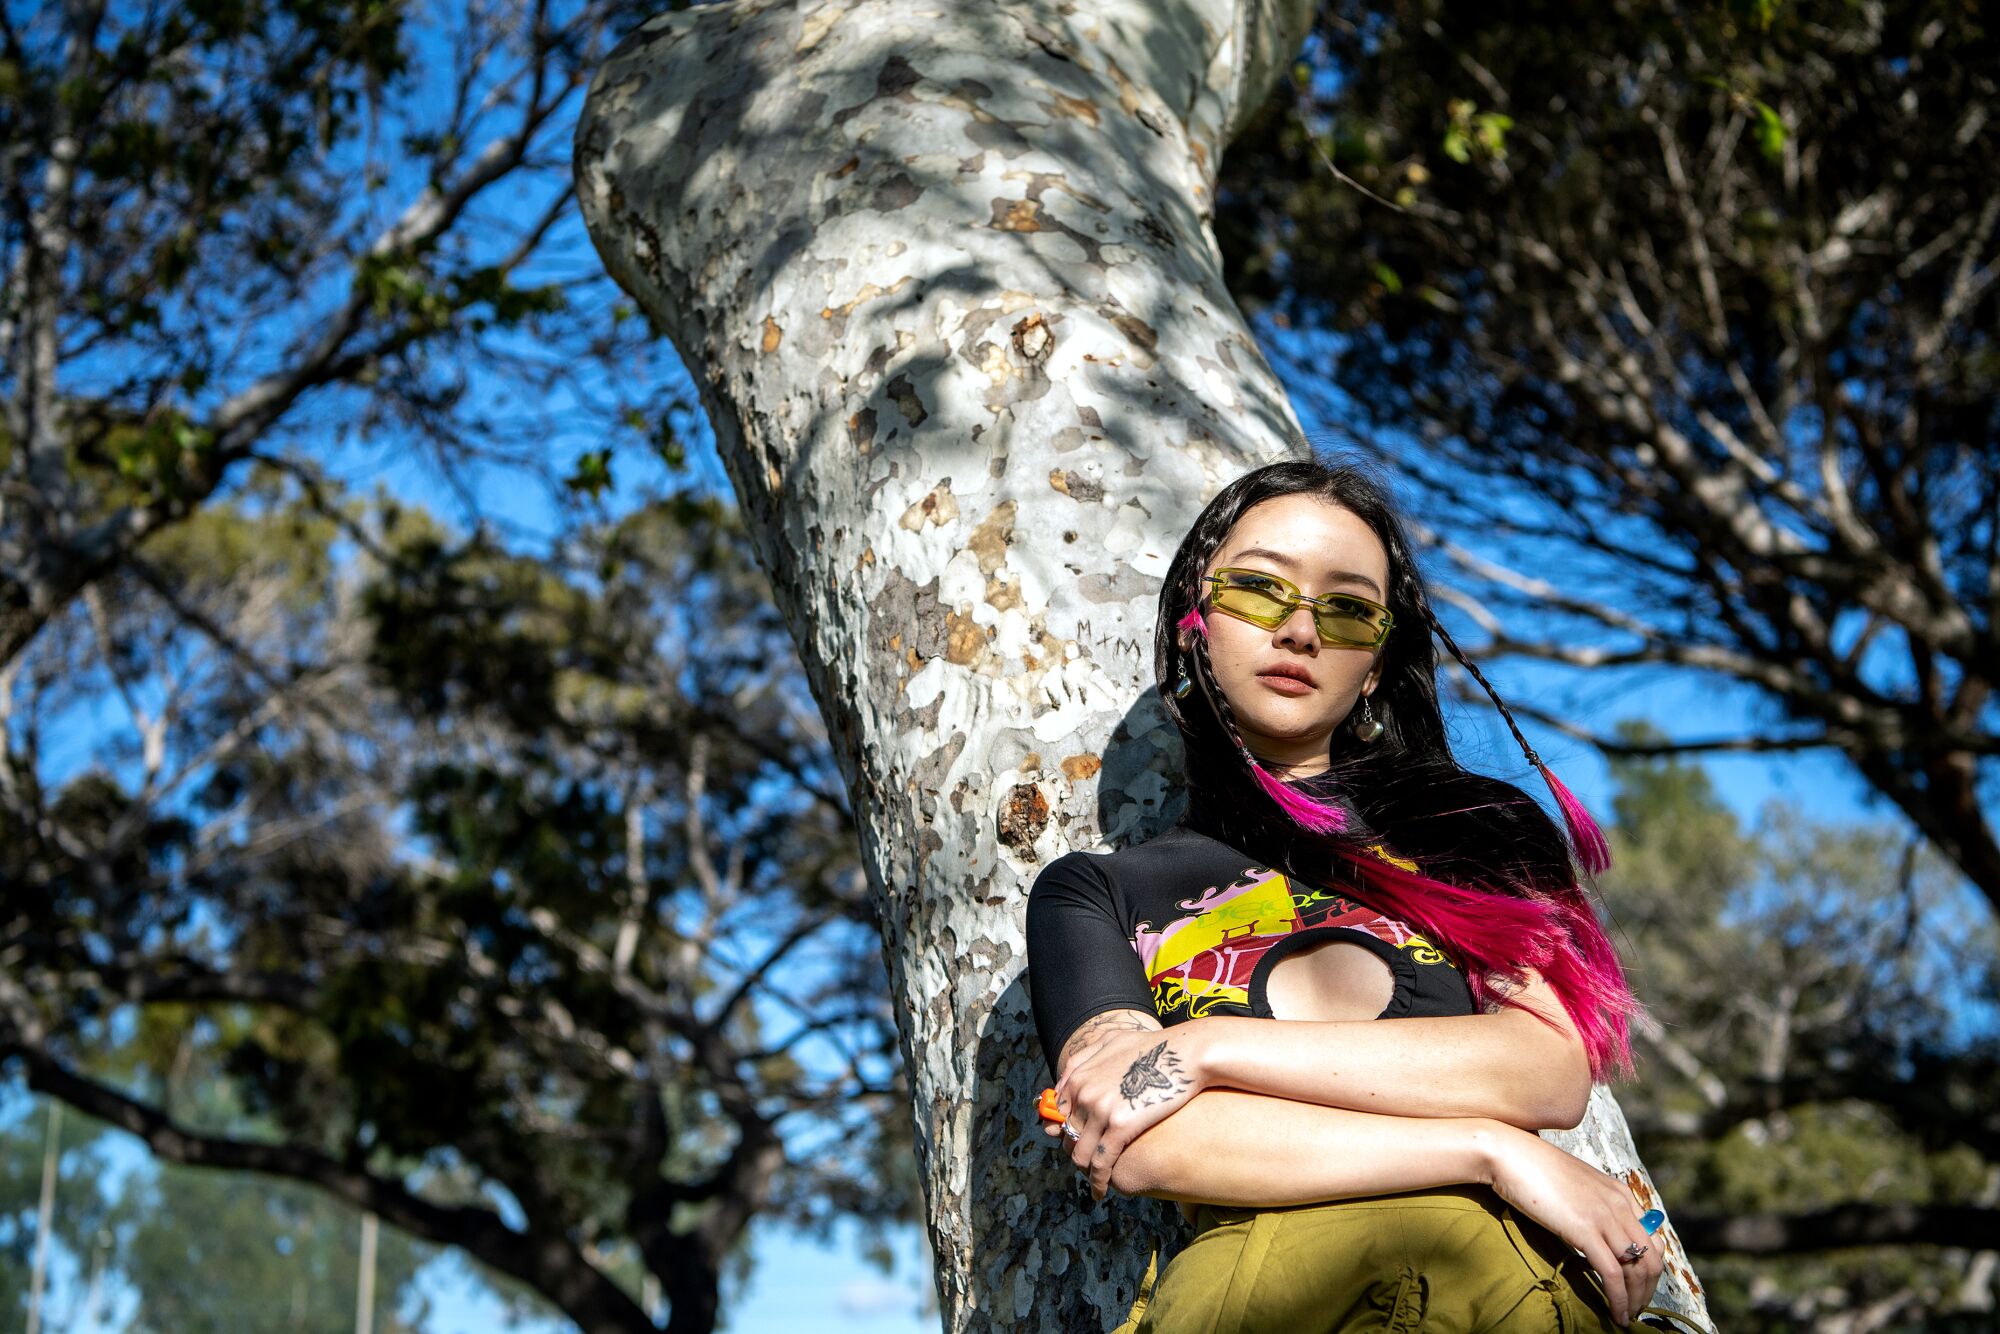 Portraits of Los Angeles based fashion stylist Katie Qian at Cheviot Hills Recreation Center